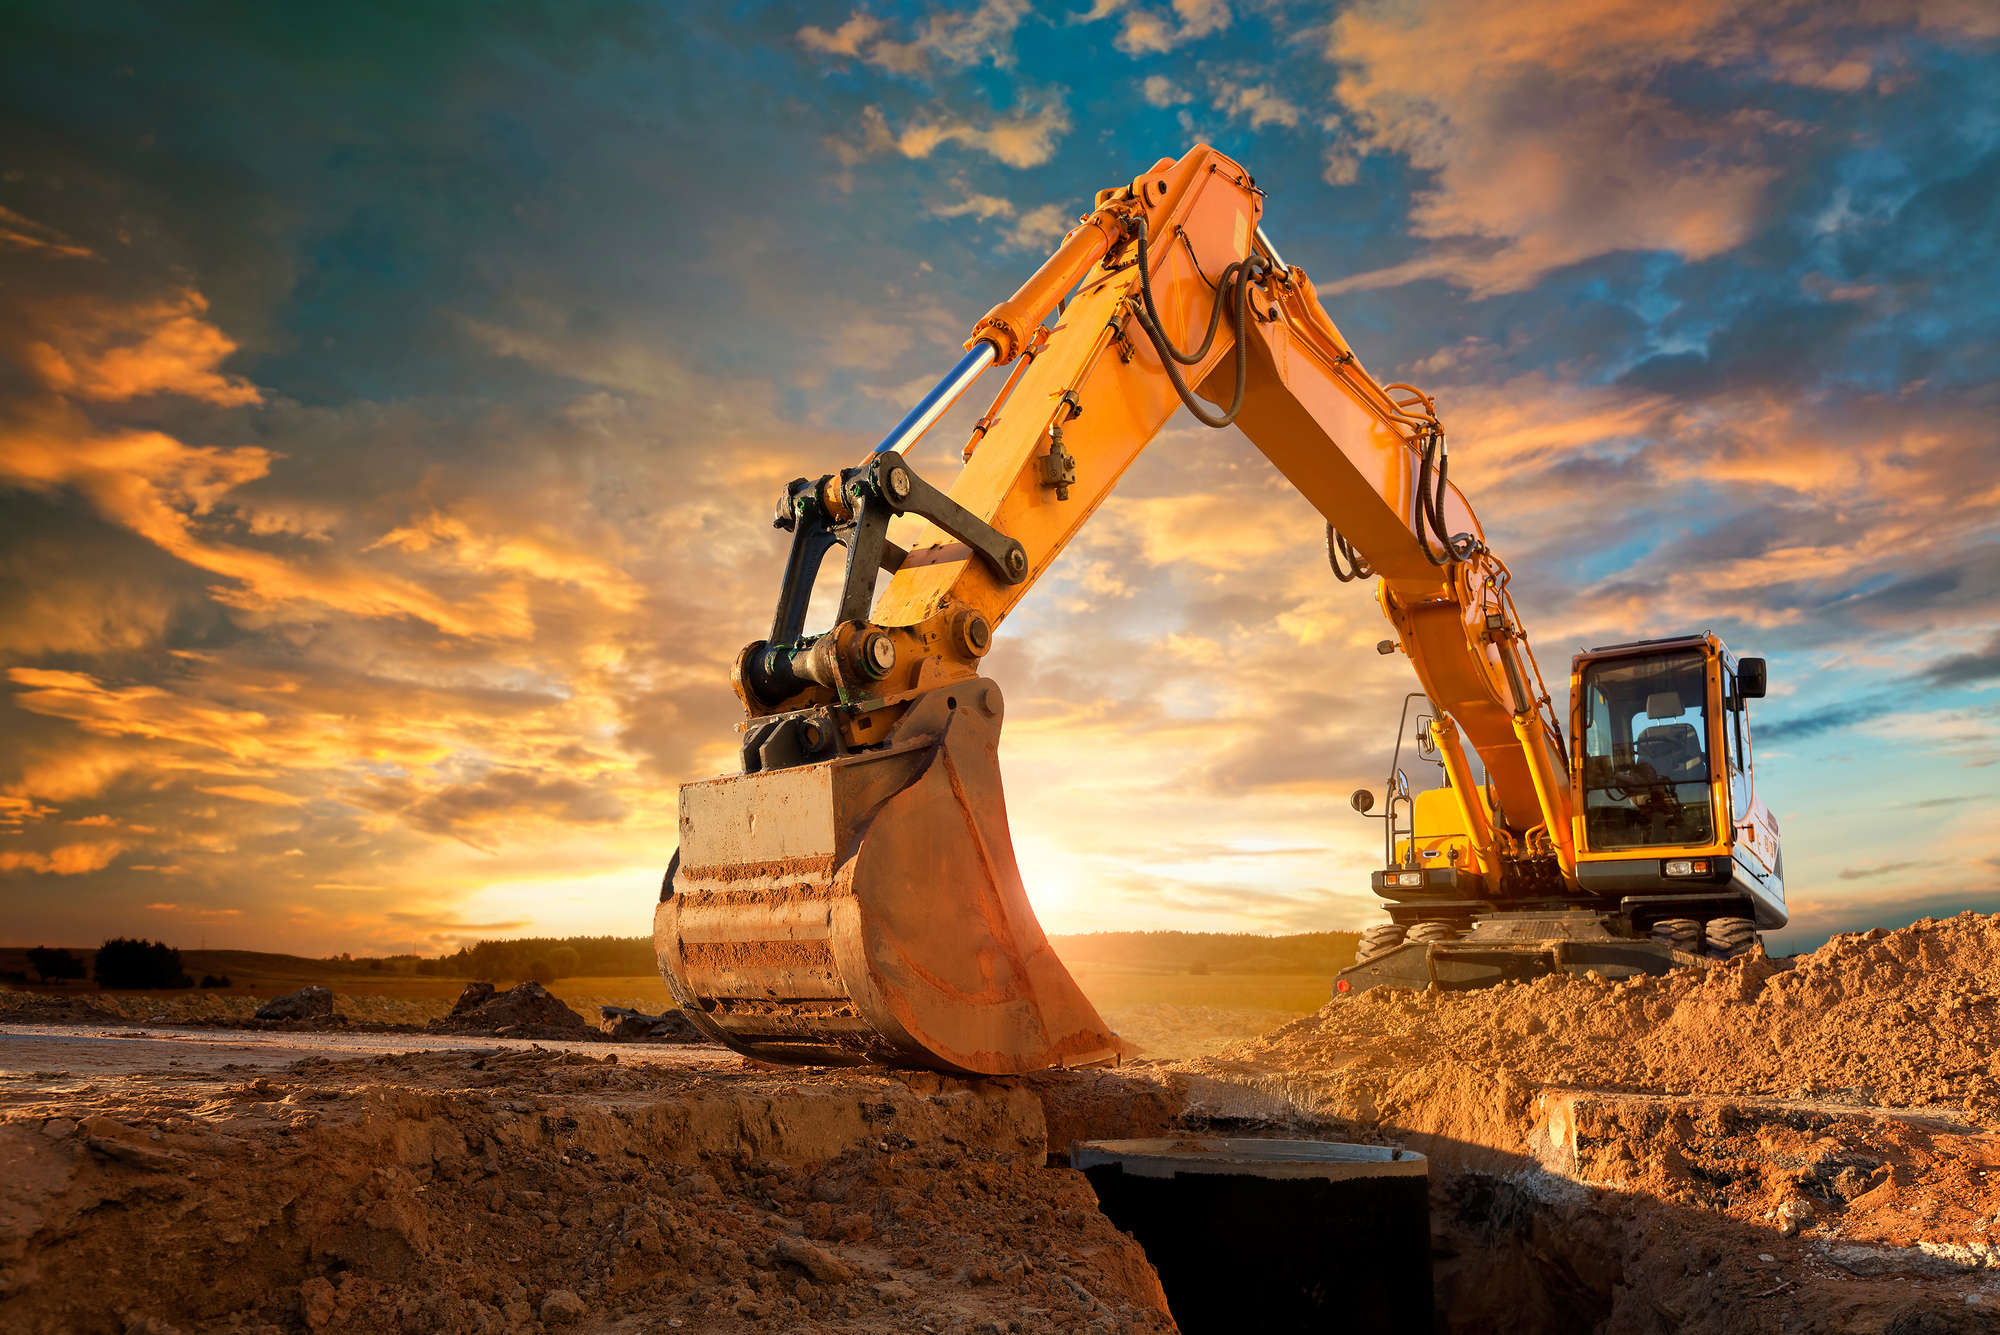             Construction sites photo wallpaper excavator at sunset on structural nonwoven
        